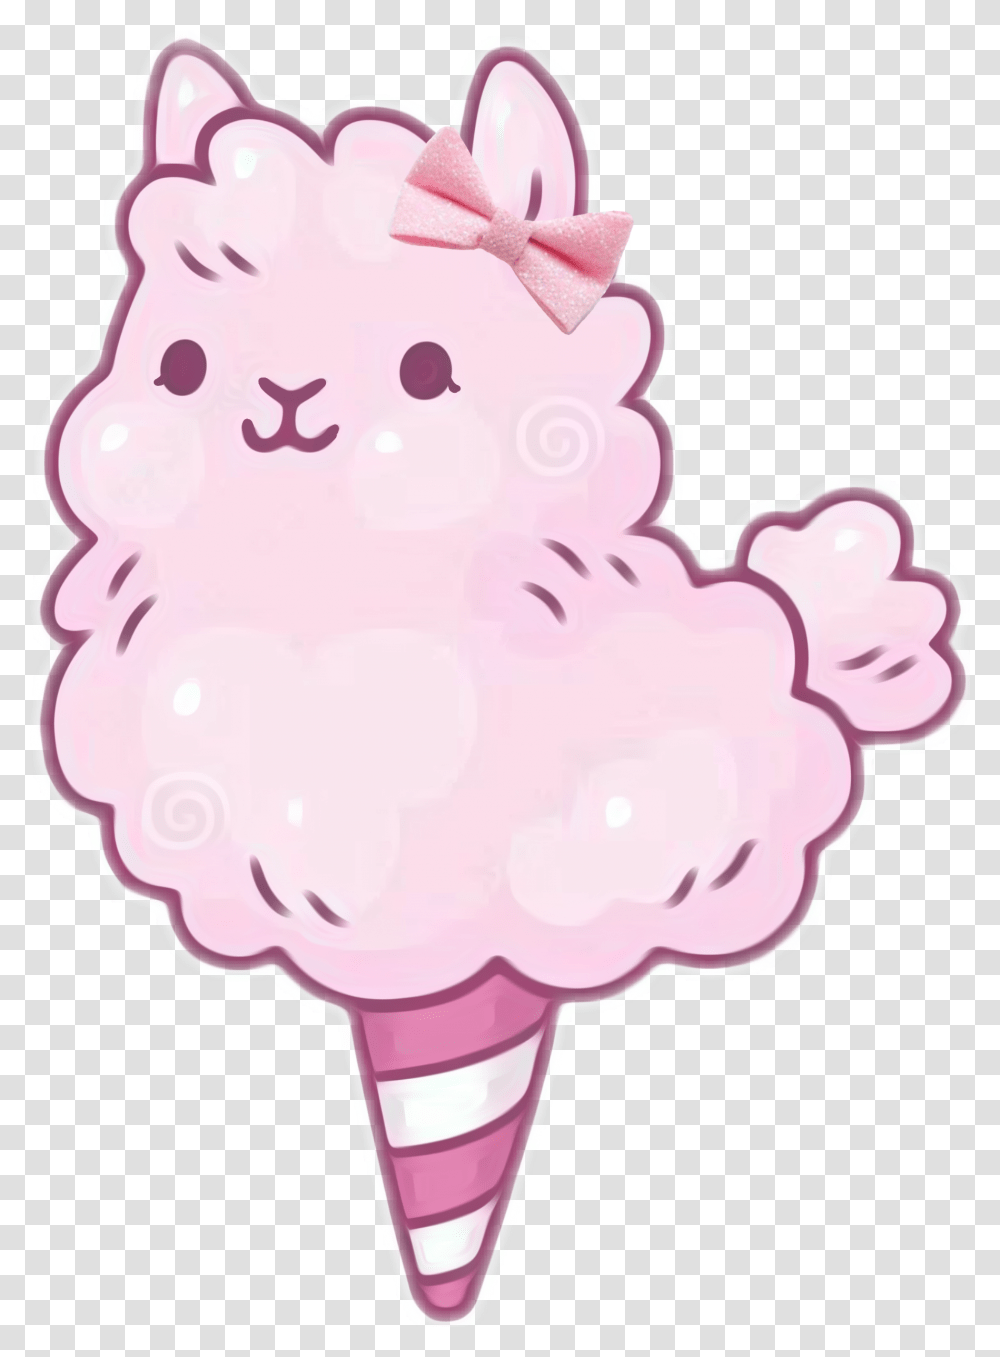 Cute Cotton Candy Cartoon, Birthday Cake, Dessert, Food, Sweets Transparent Png